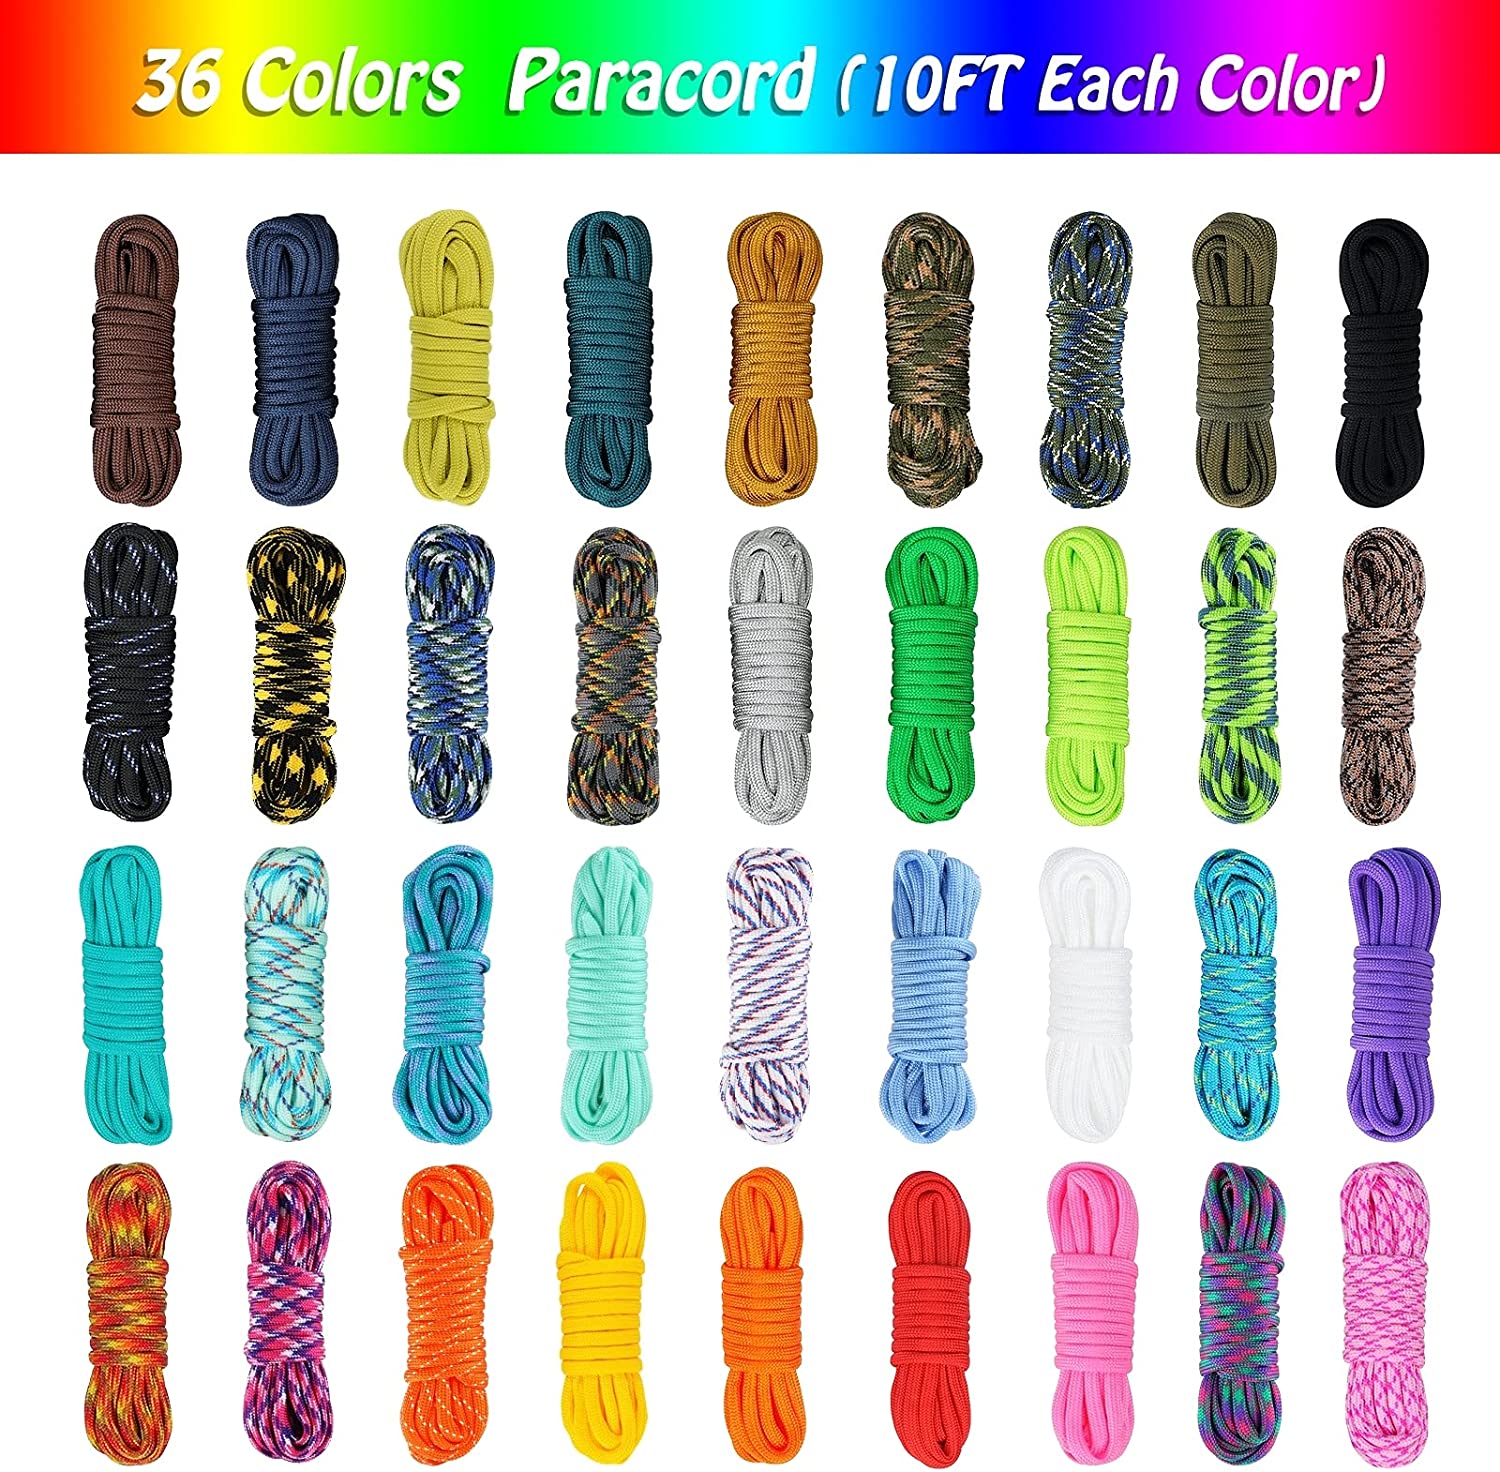 550 Paracord Combo Kit with Instruction Book - 36 Colors Multifunction  Paracord Ropes and Complete Accessories for Making Paracord Bracelets,  Lanyards, Dog Collars 